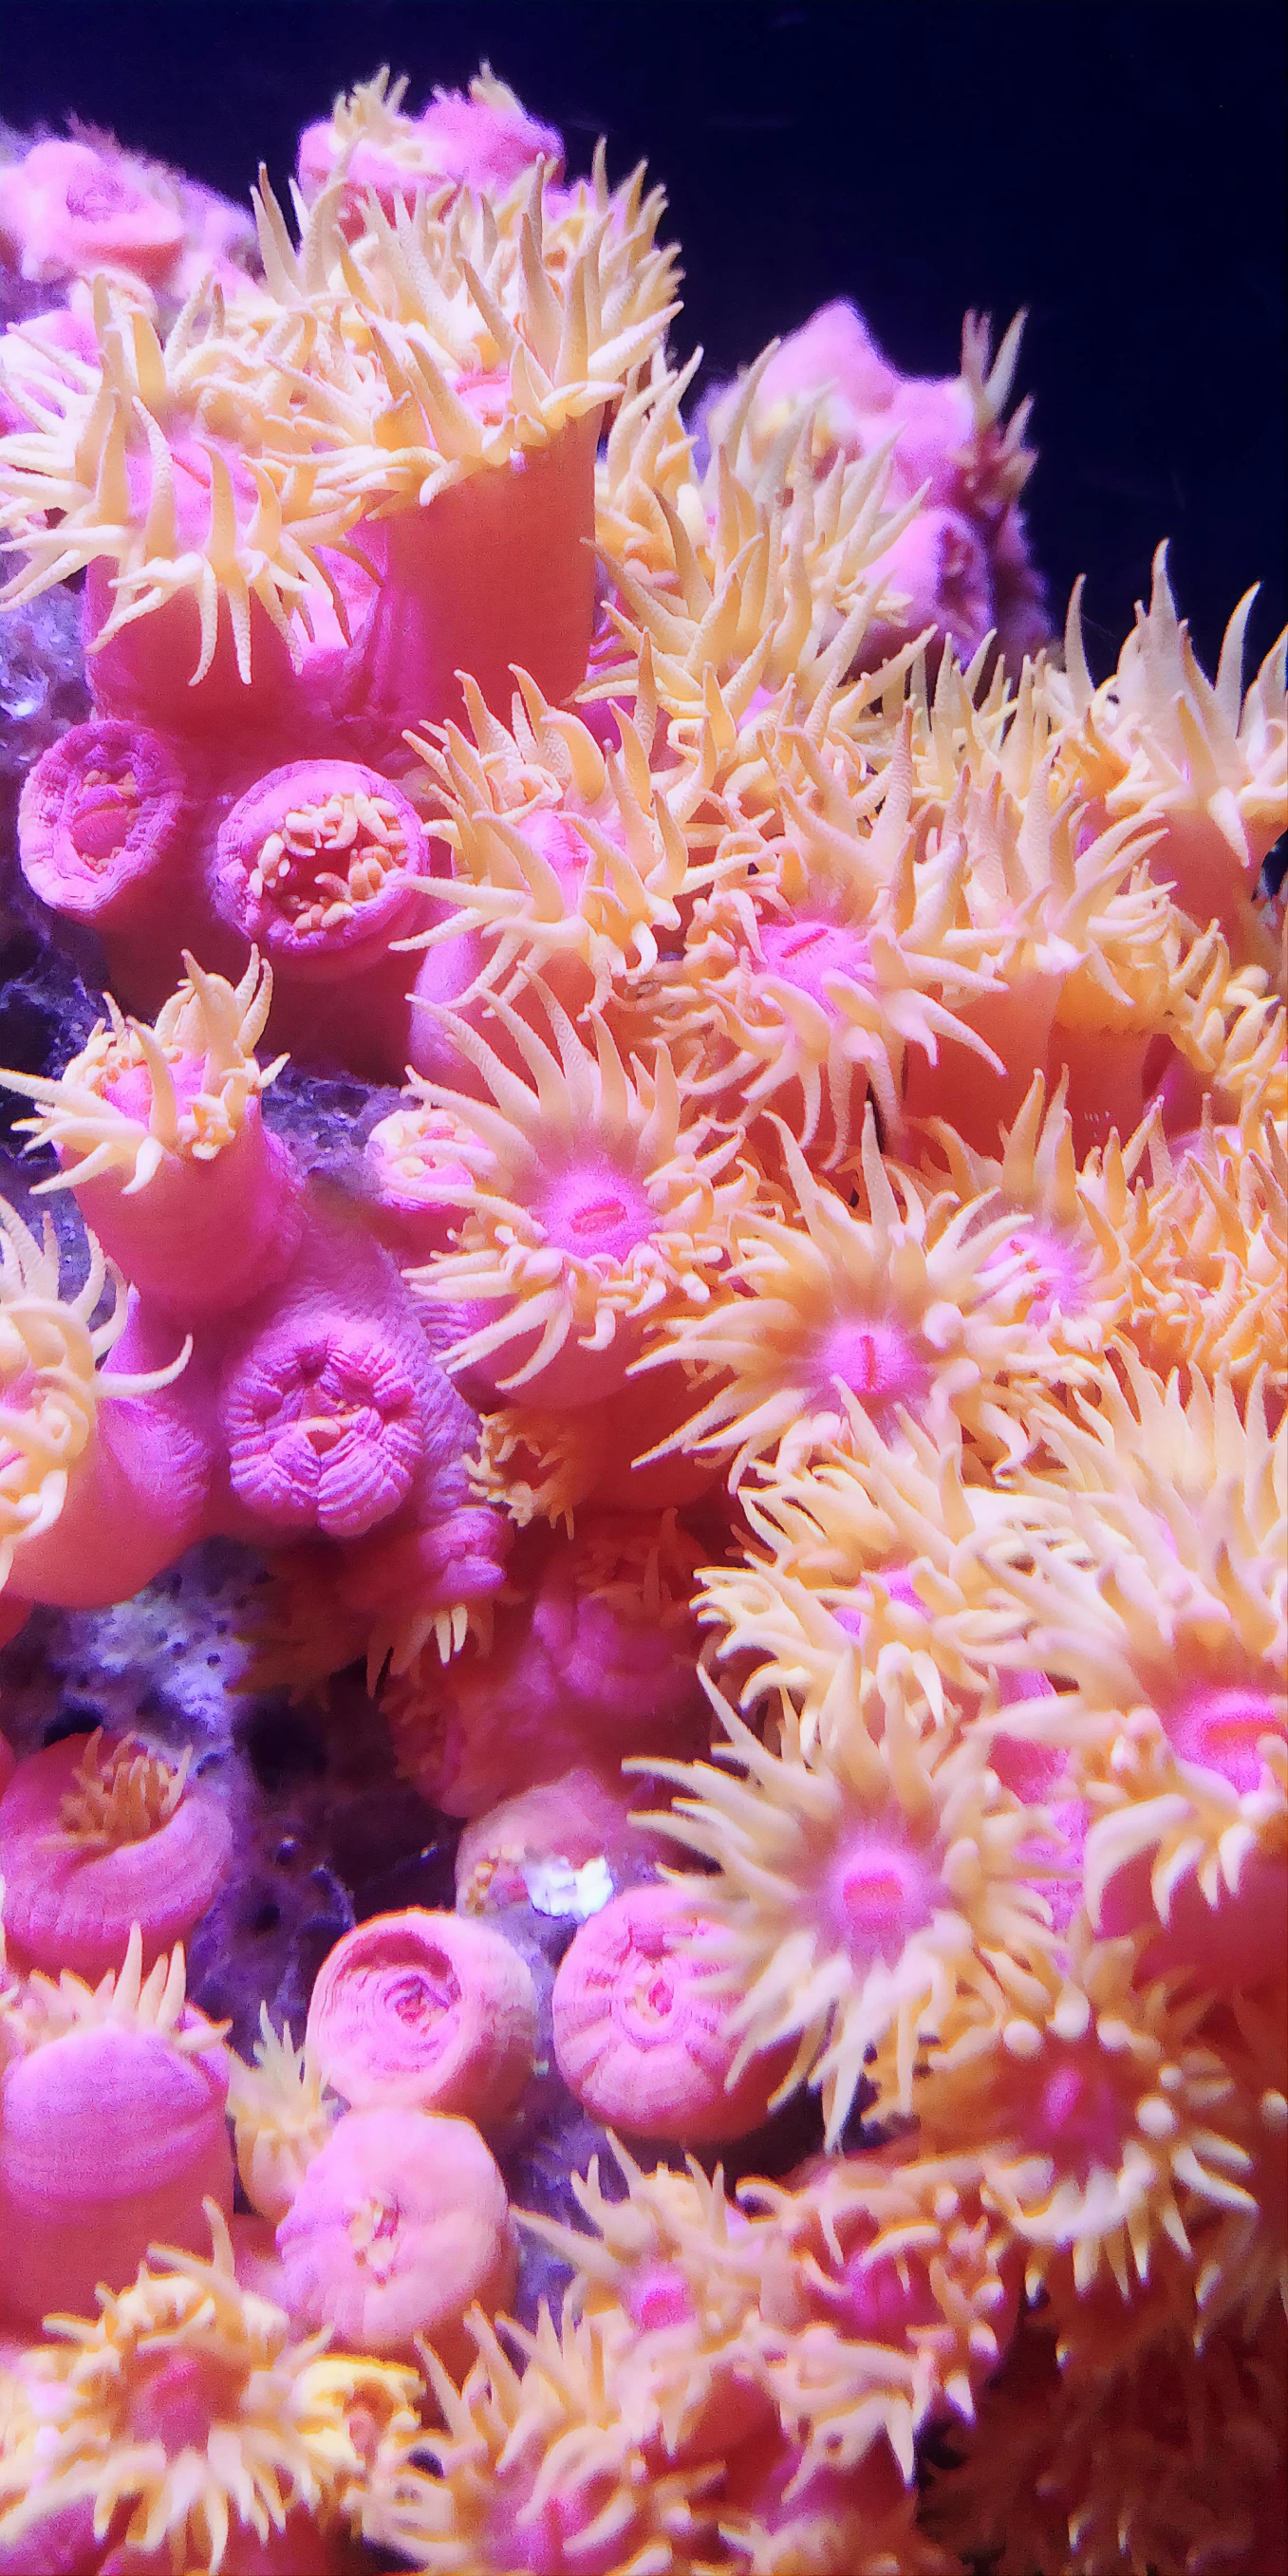 a close up of an orange and pink sea anemone, pink yellow flowers, reddit post, high-resolution photo